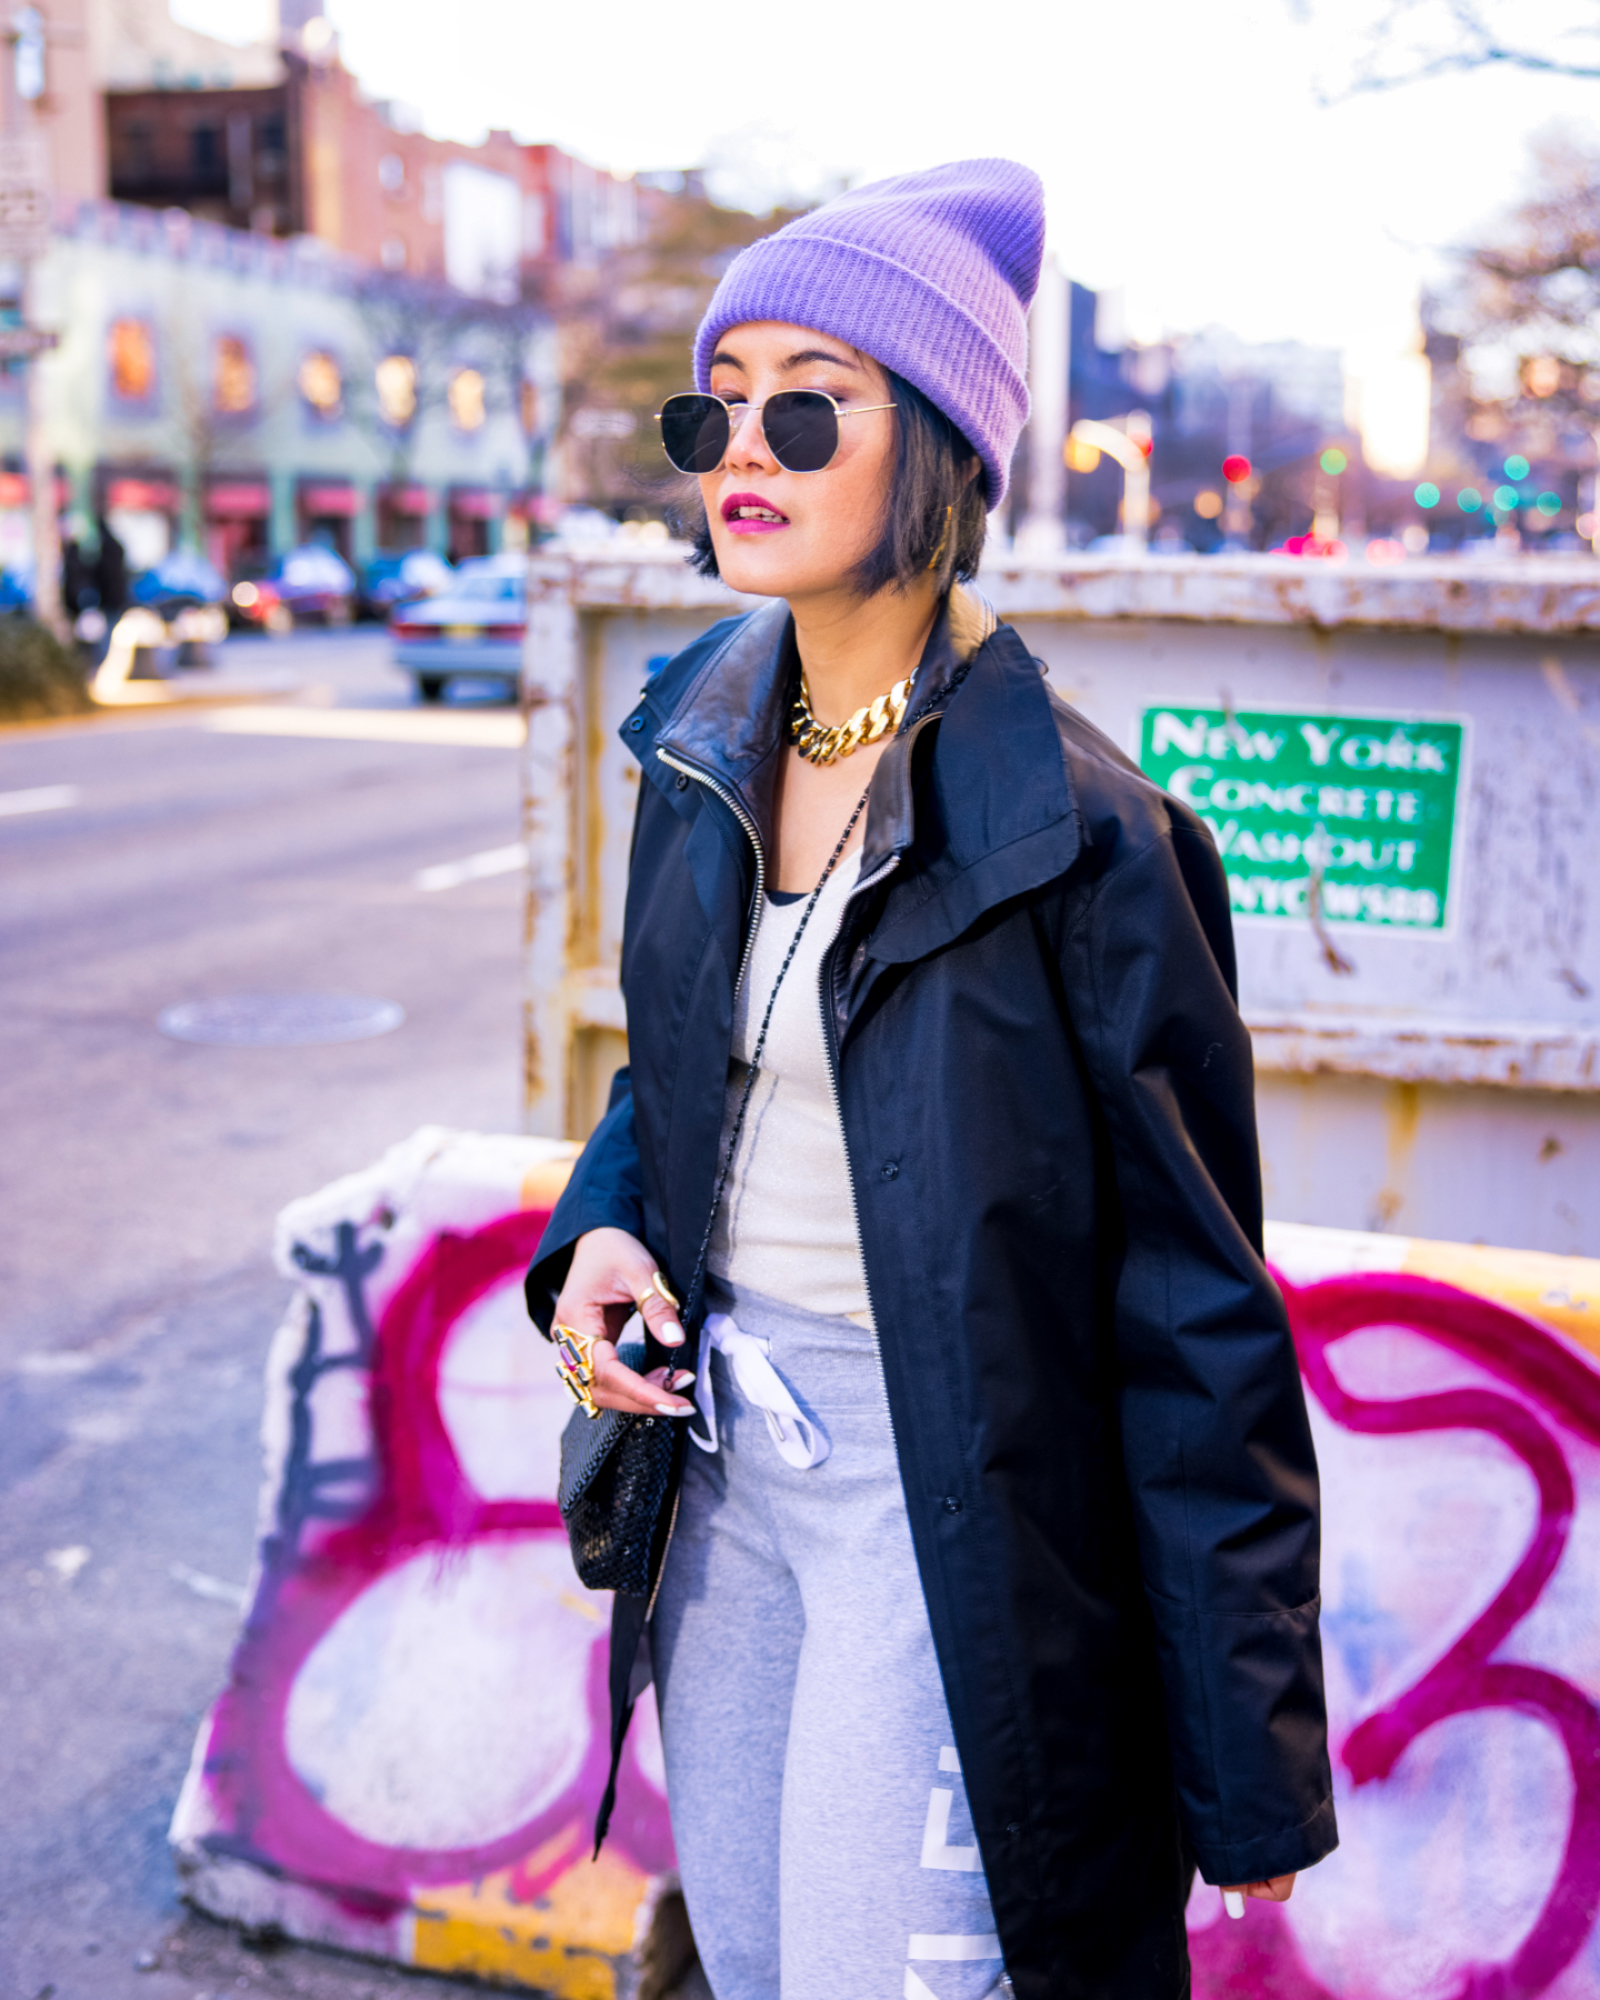 nanphanita jacob is styling winter fashion with san diego hat company slouchy knitted beanie in new york city